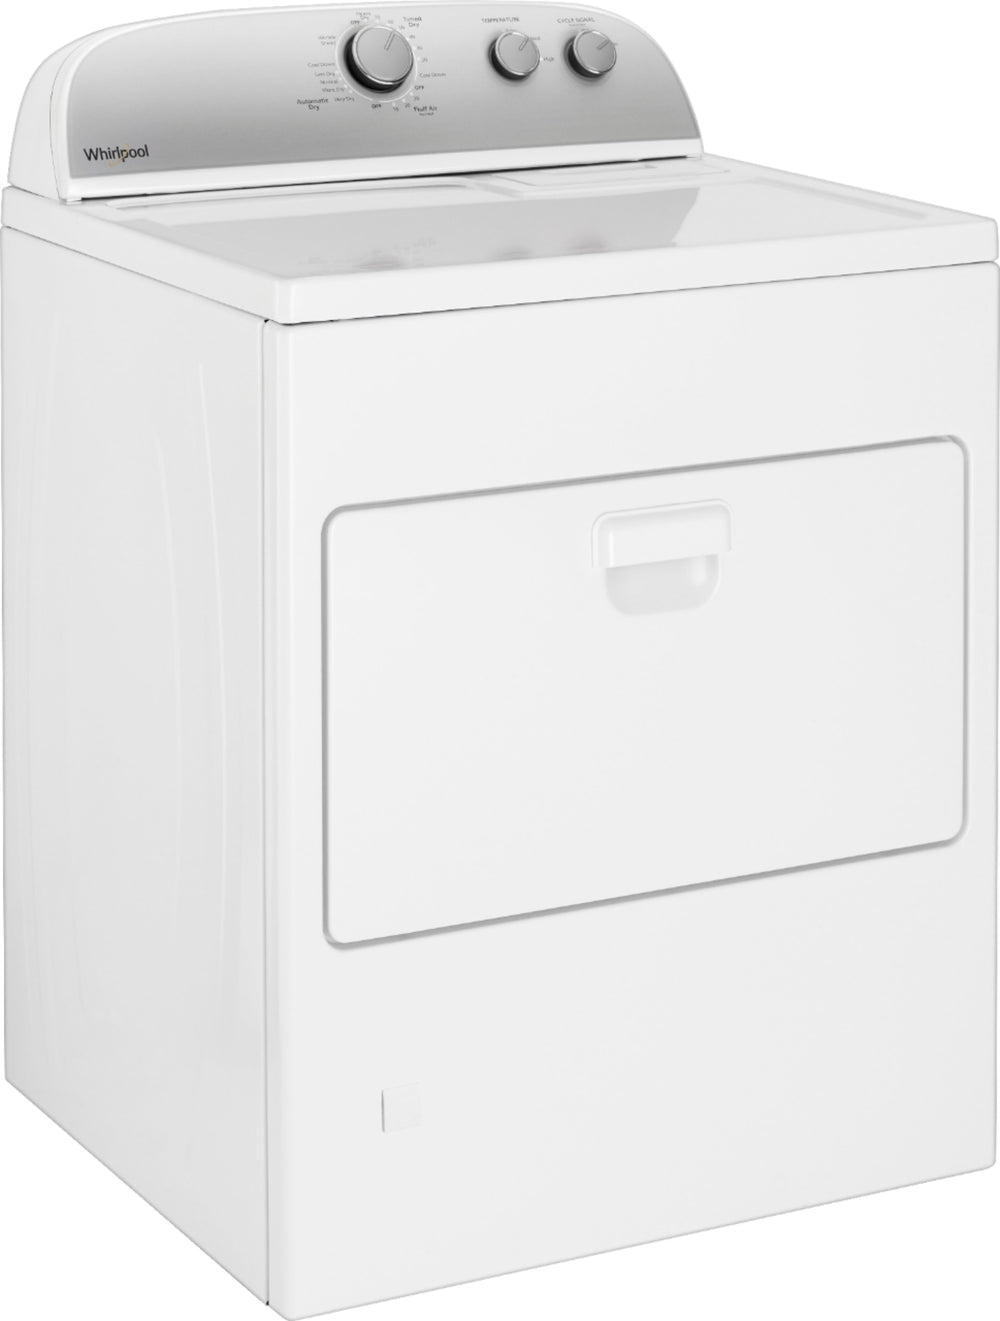 Whirlpool - 7 Cu. Ft. Gas Dryer with AutoDry Drying System - White_1